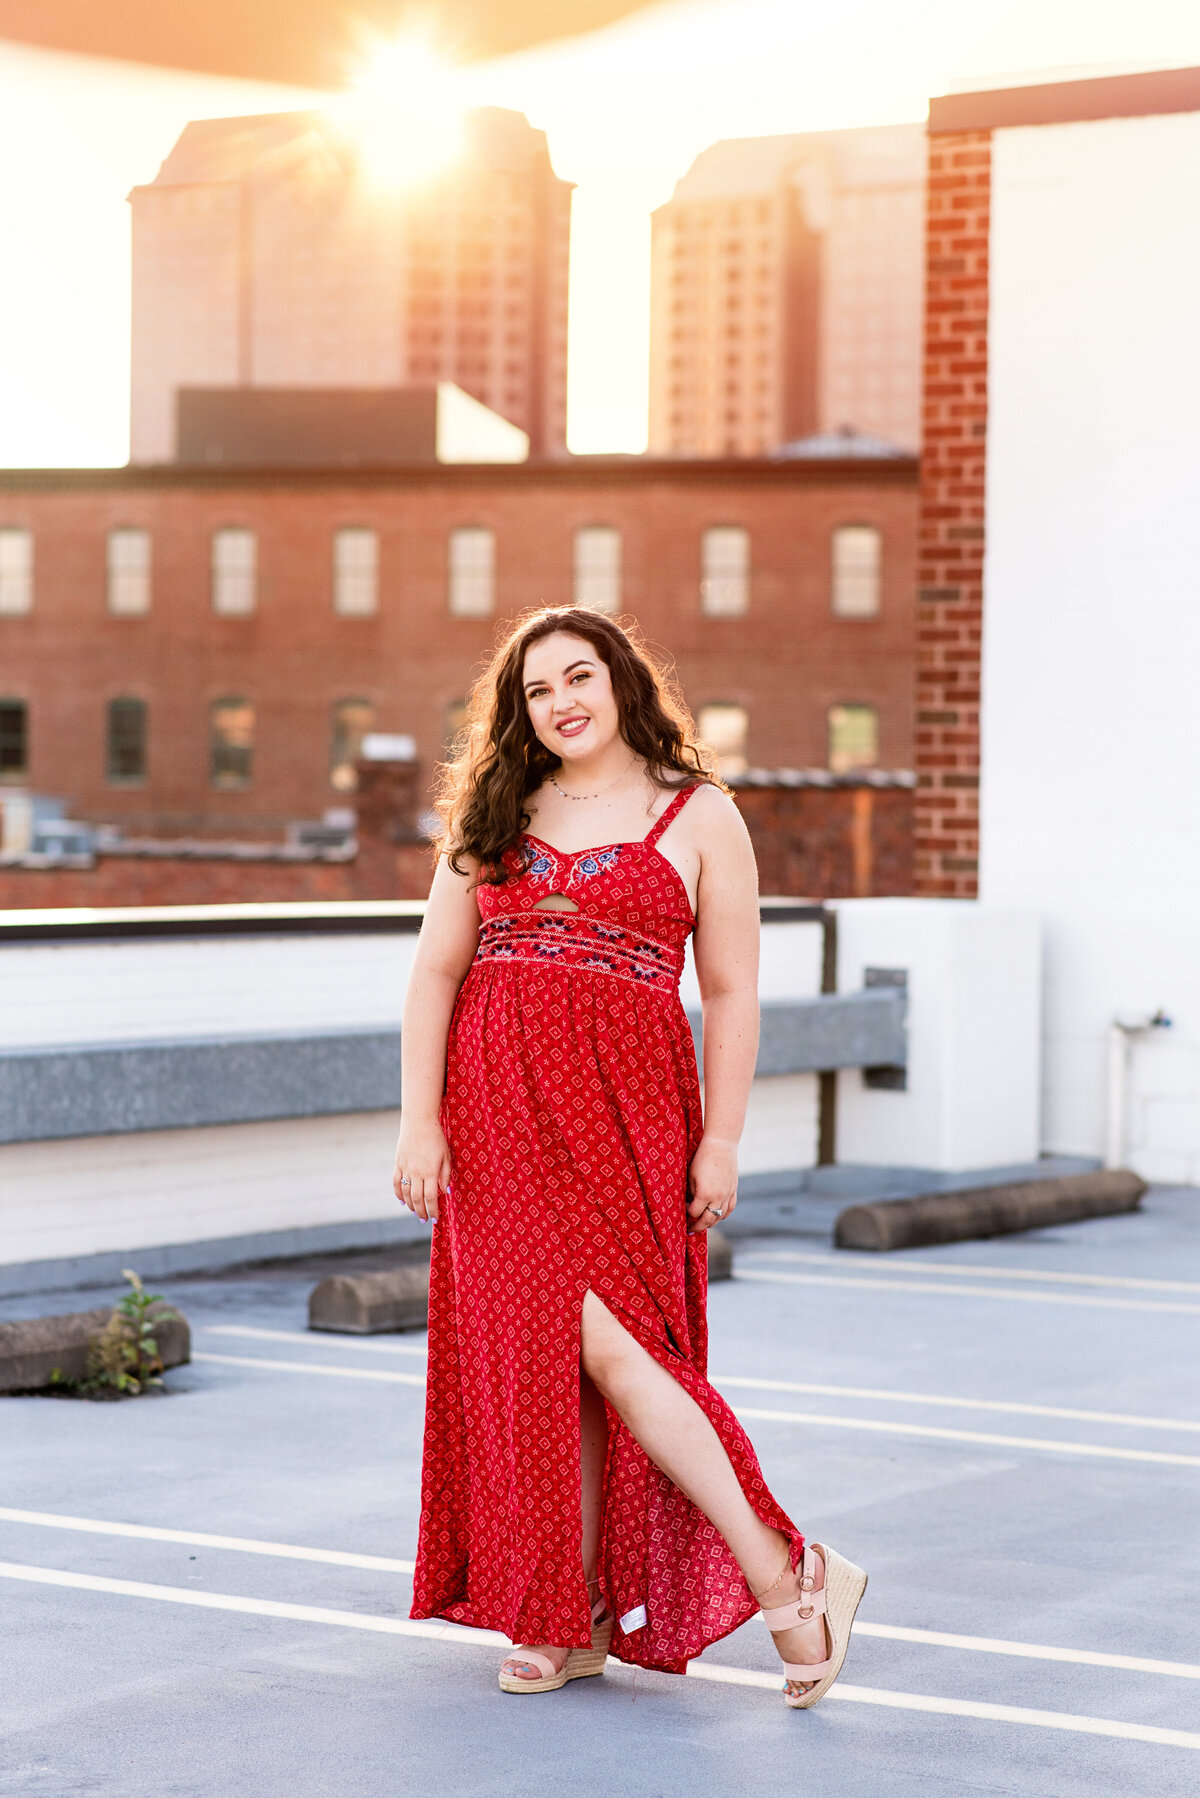 RVA senior girl wearing long red dress poses at sunset on a rooftop downtown RVA.